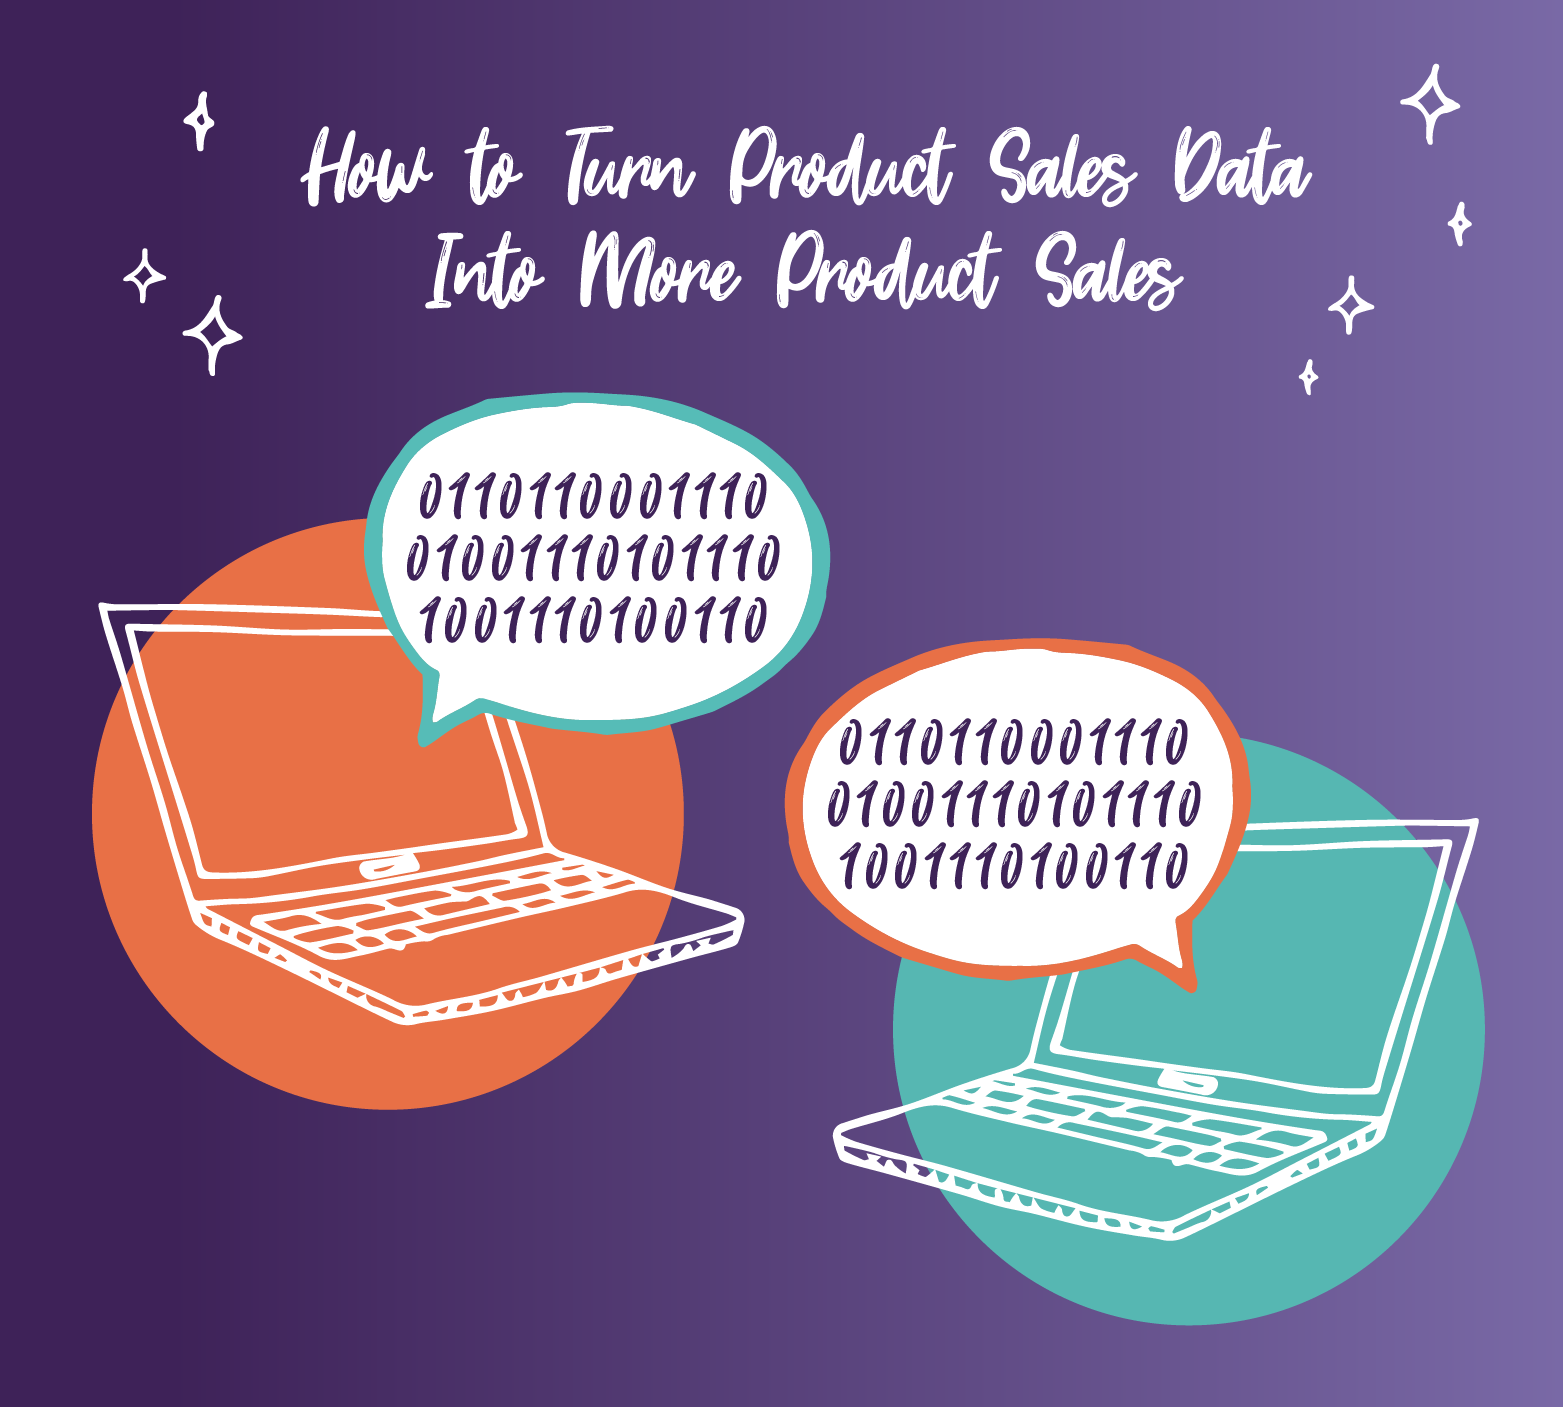 How to Turn Product Sales Data Into More Product Sales